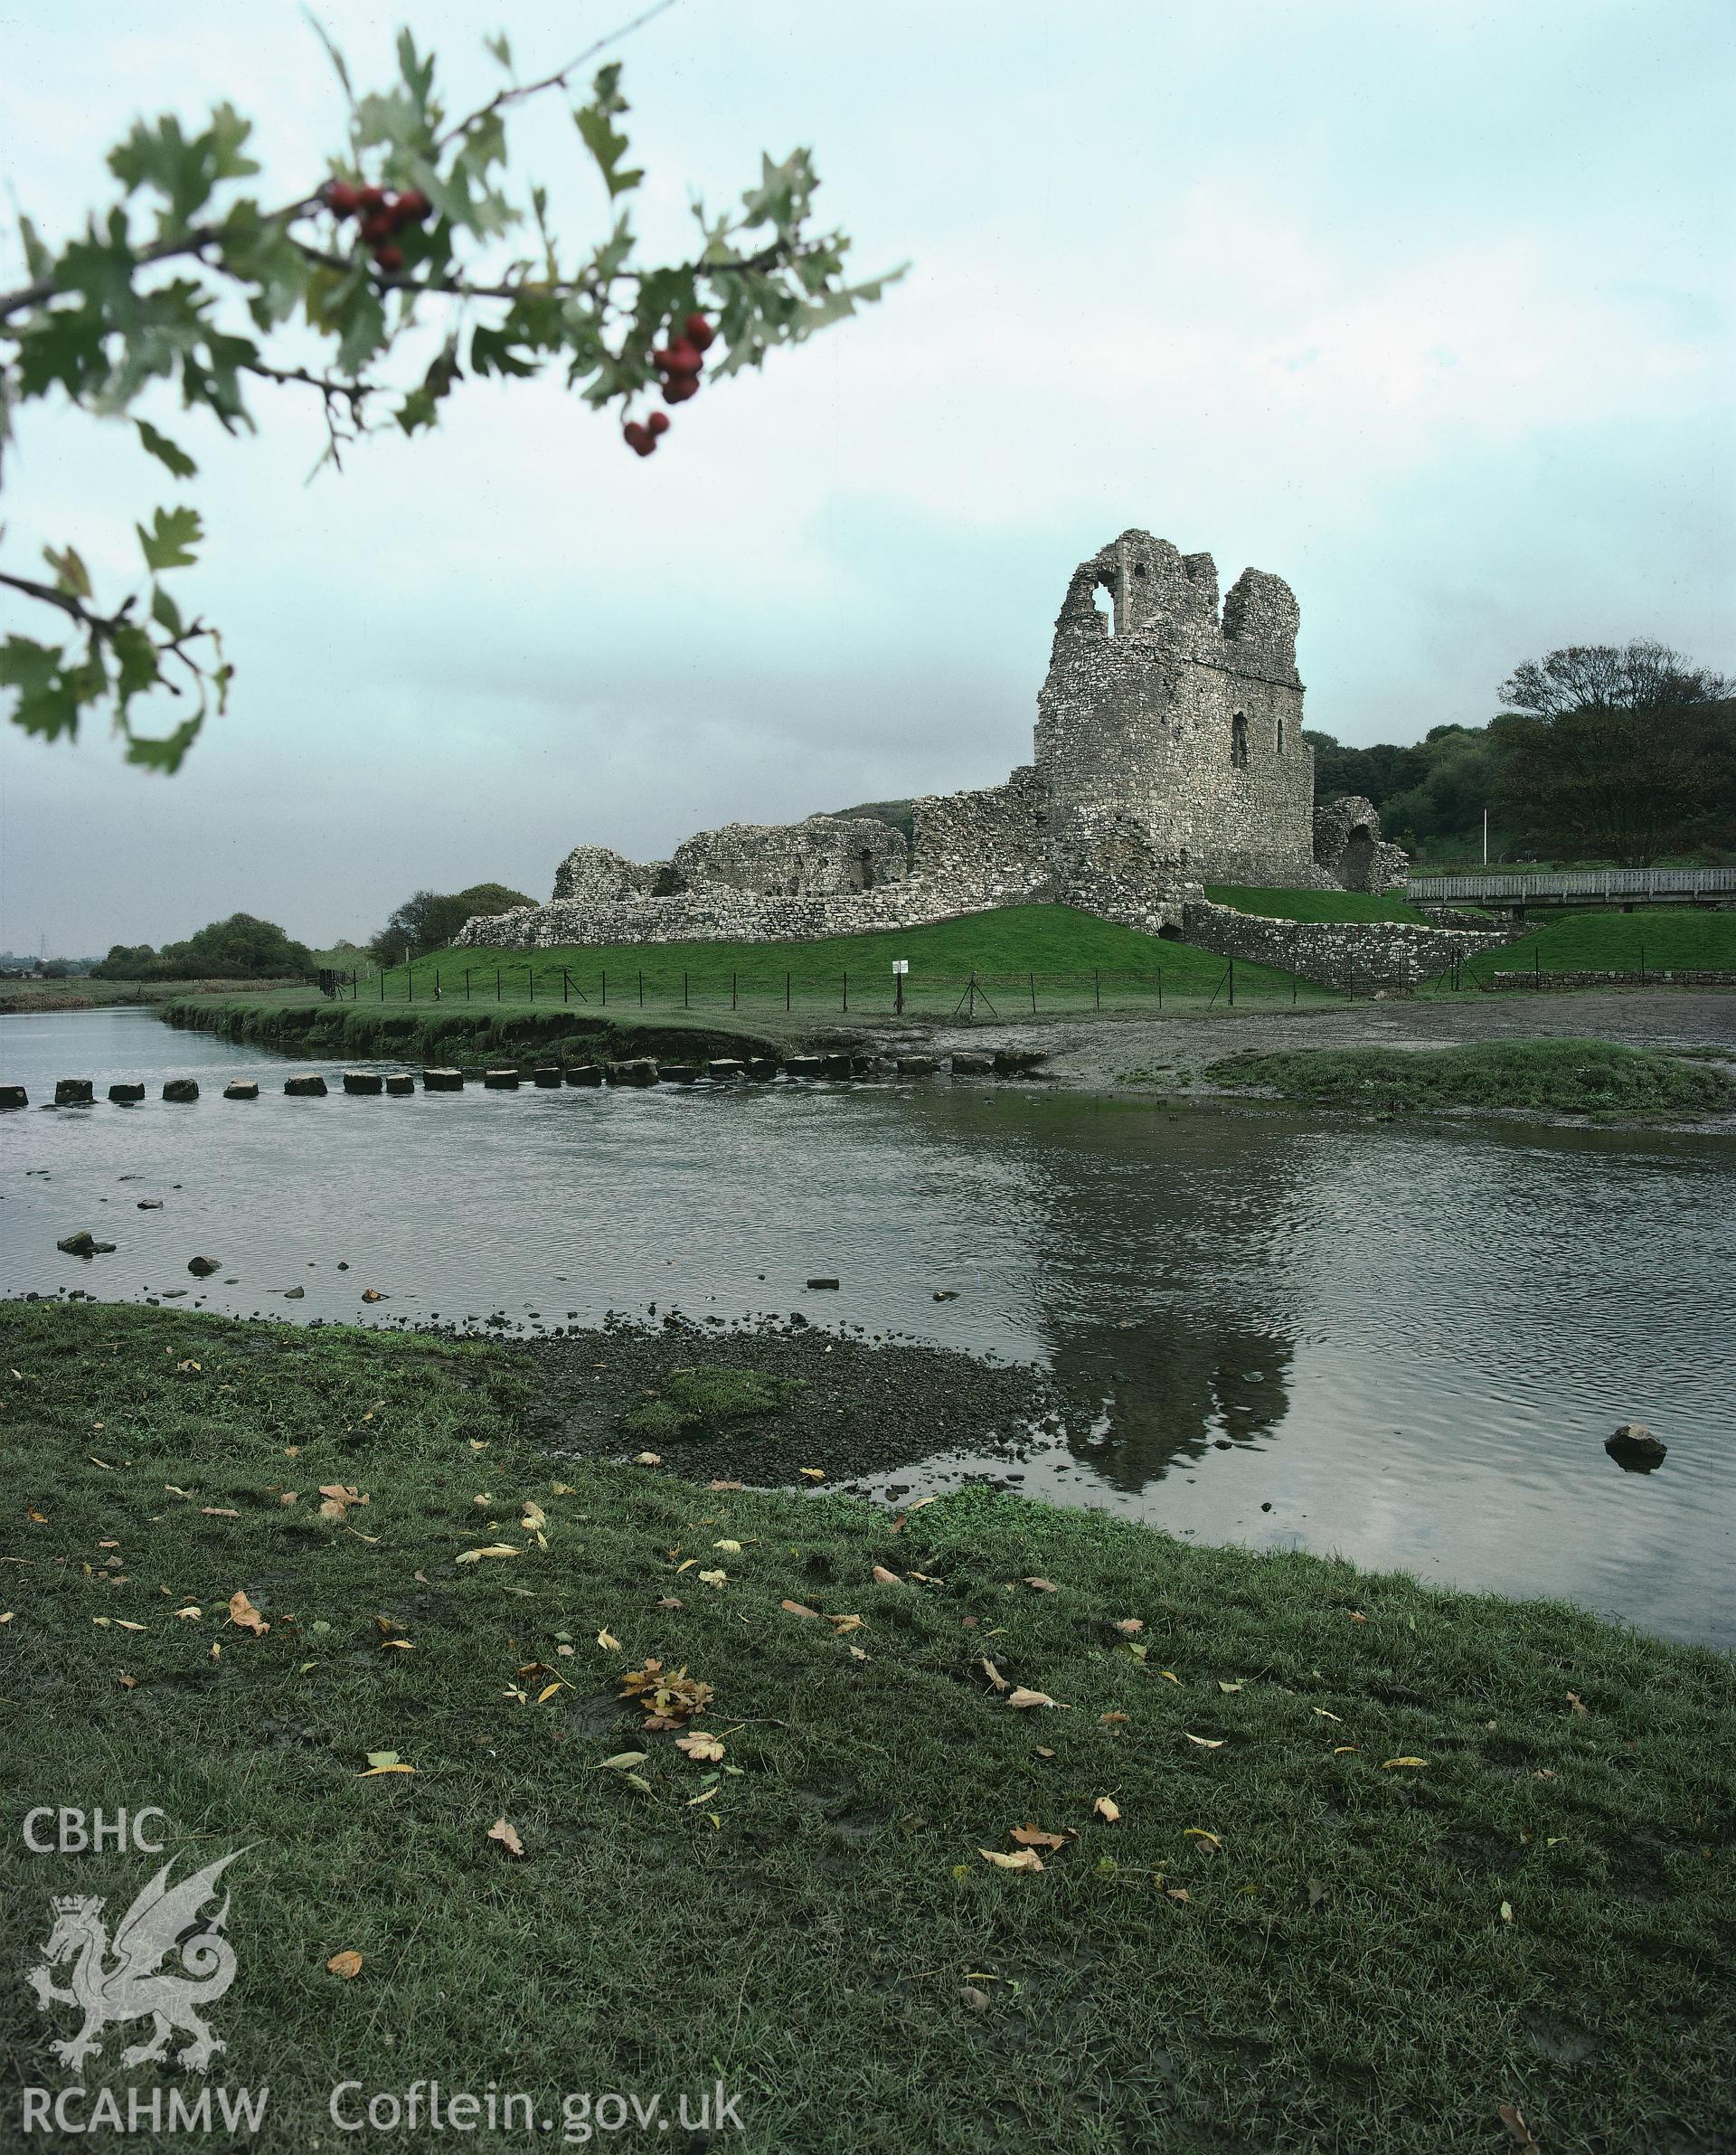 RCAHMW colour transparency showing Ogmore Castle and stepping stones